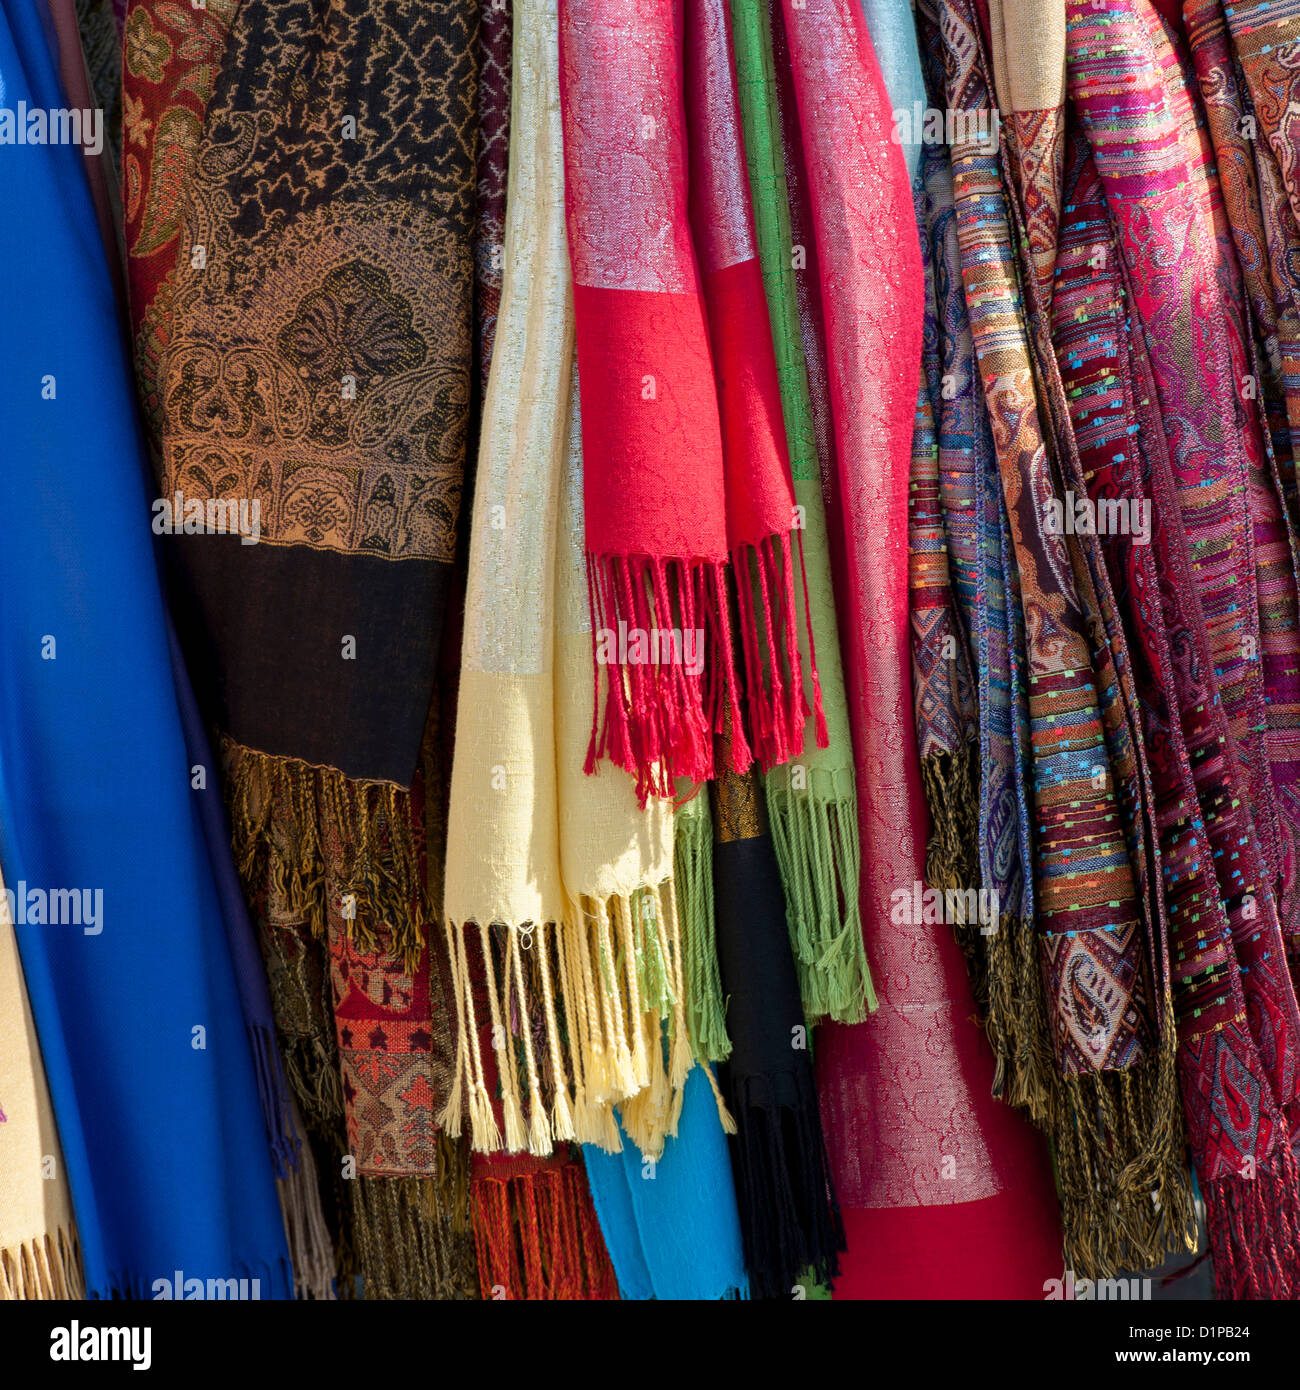 Shawls and stoles at a market stall, Istanbul, Turkey Stock Photo